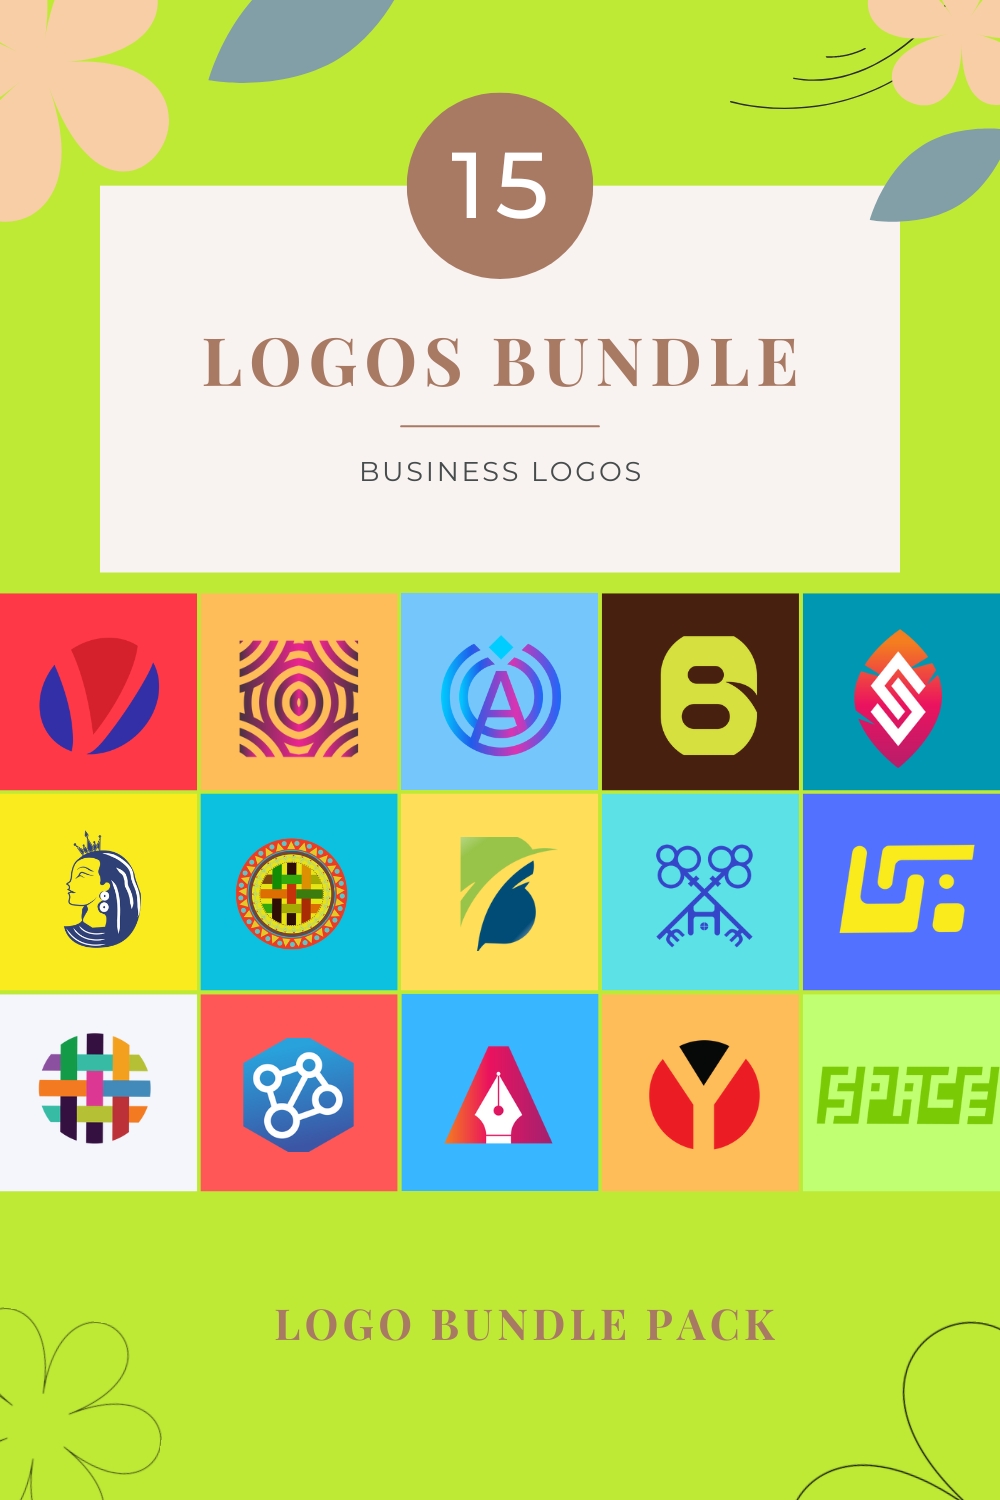 Business logos (15-Logos) bundle pack -Only $35 pinterest preview image.